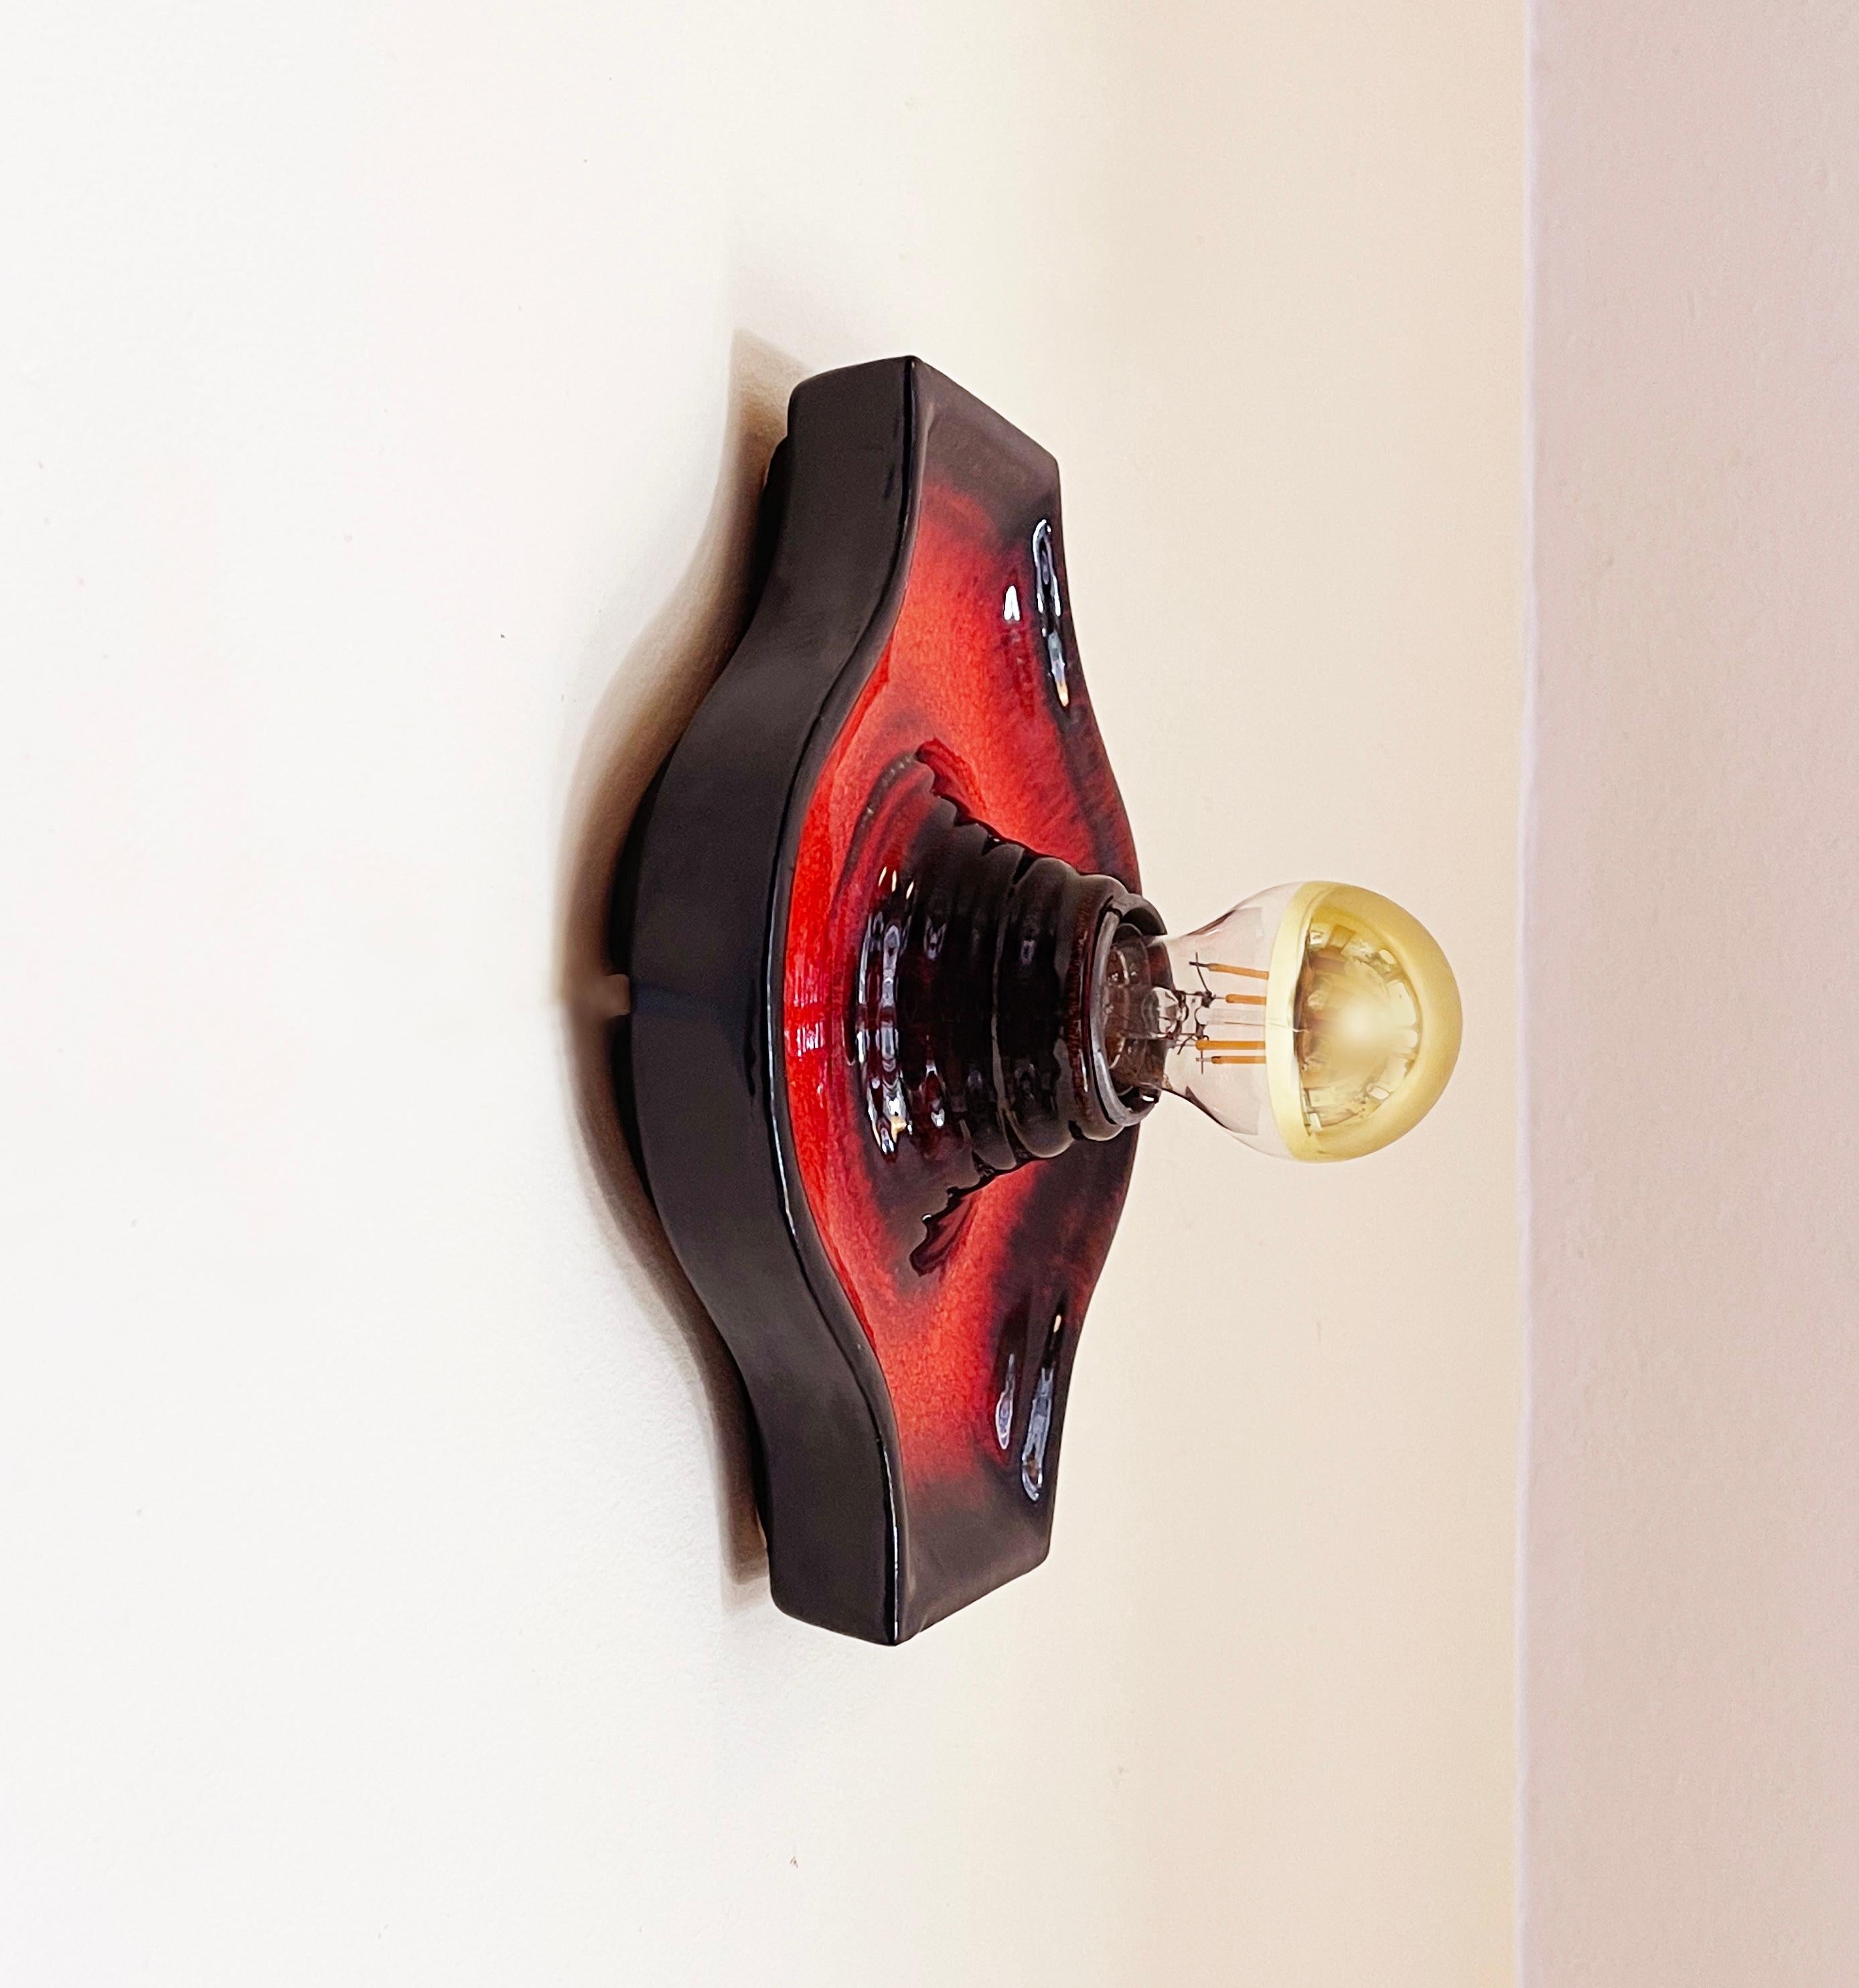 Fantastic sconce / wall light from Fat Lava ceramic by ''Hustadt Leuchten'' comes in a dark Brown, and vibrant red-orange glaze.
The chunky mid- century design favourite can be wall- or ceiling mounted.
The direction can vary and be either hardwired